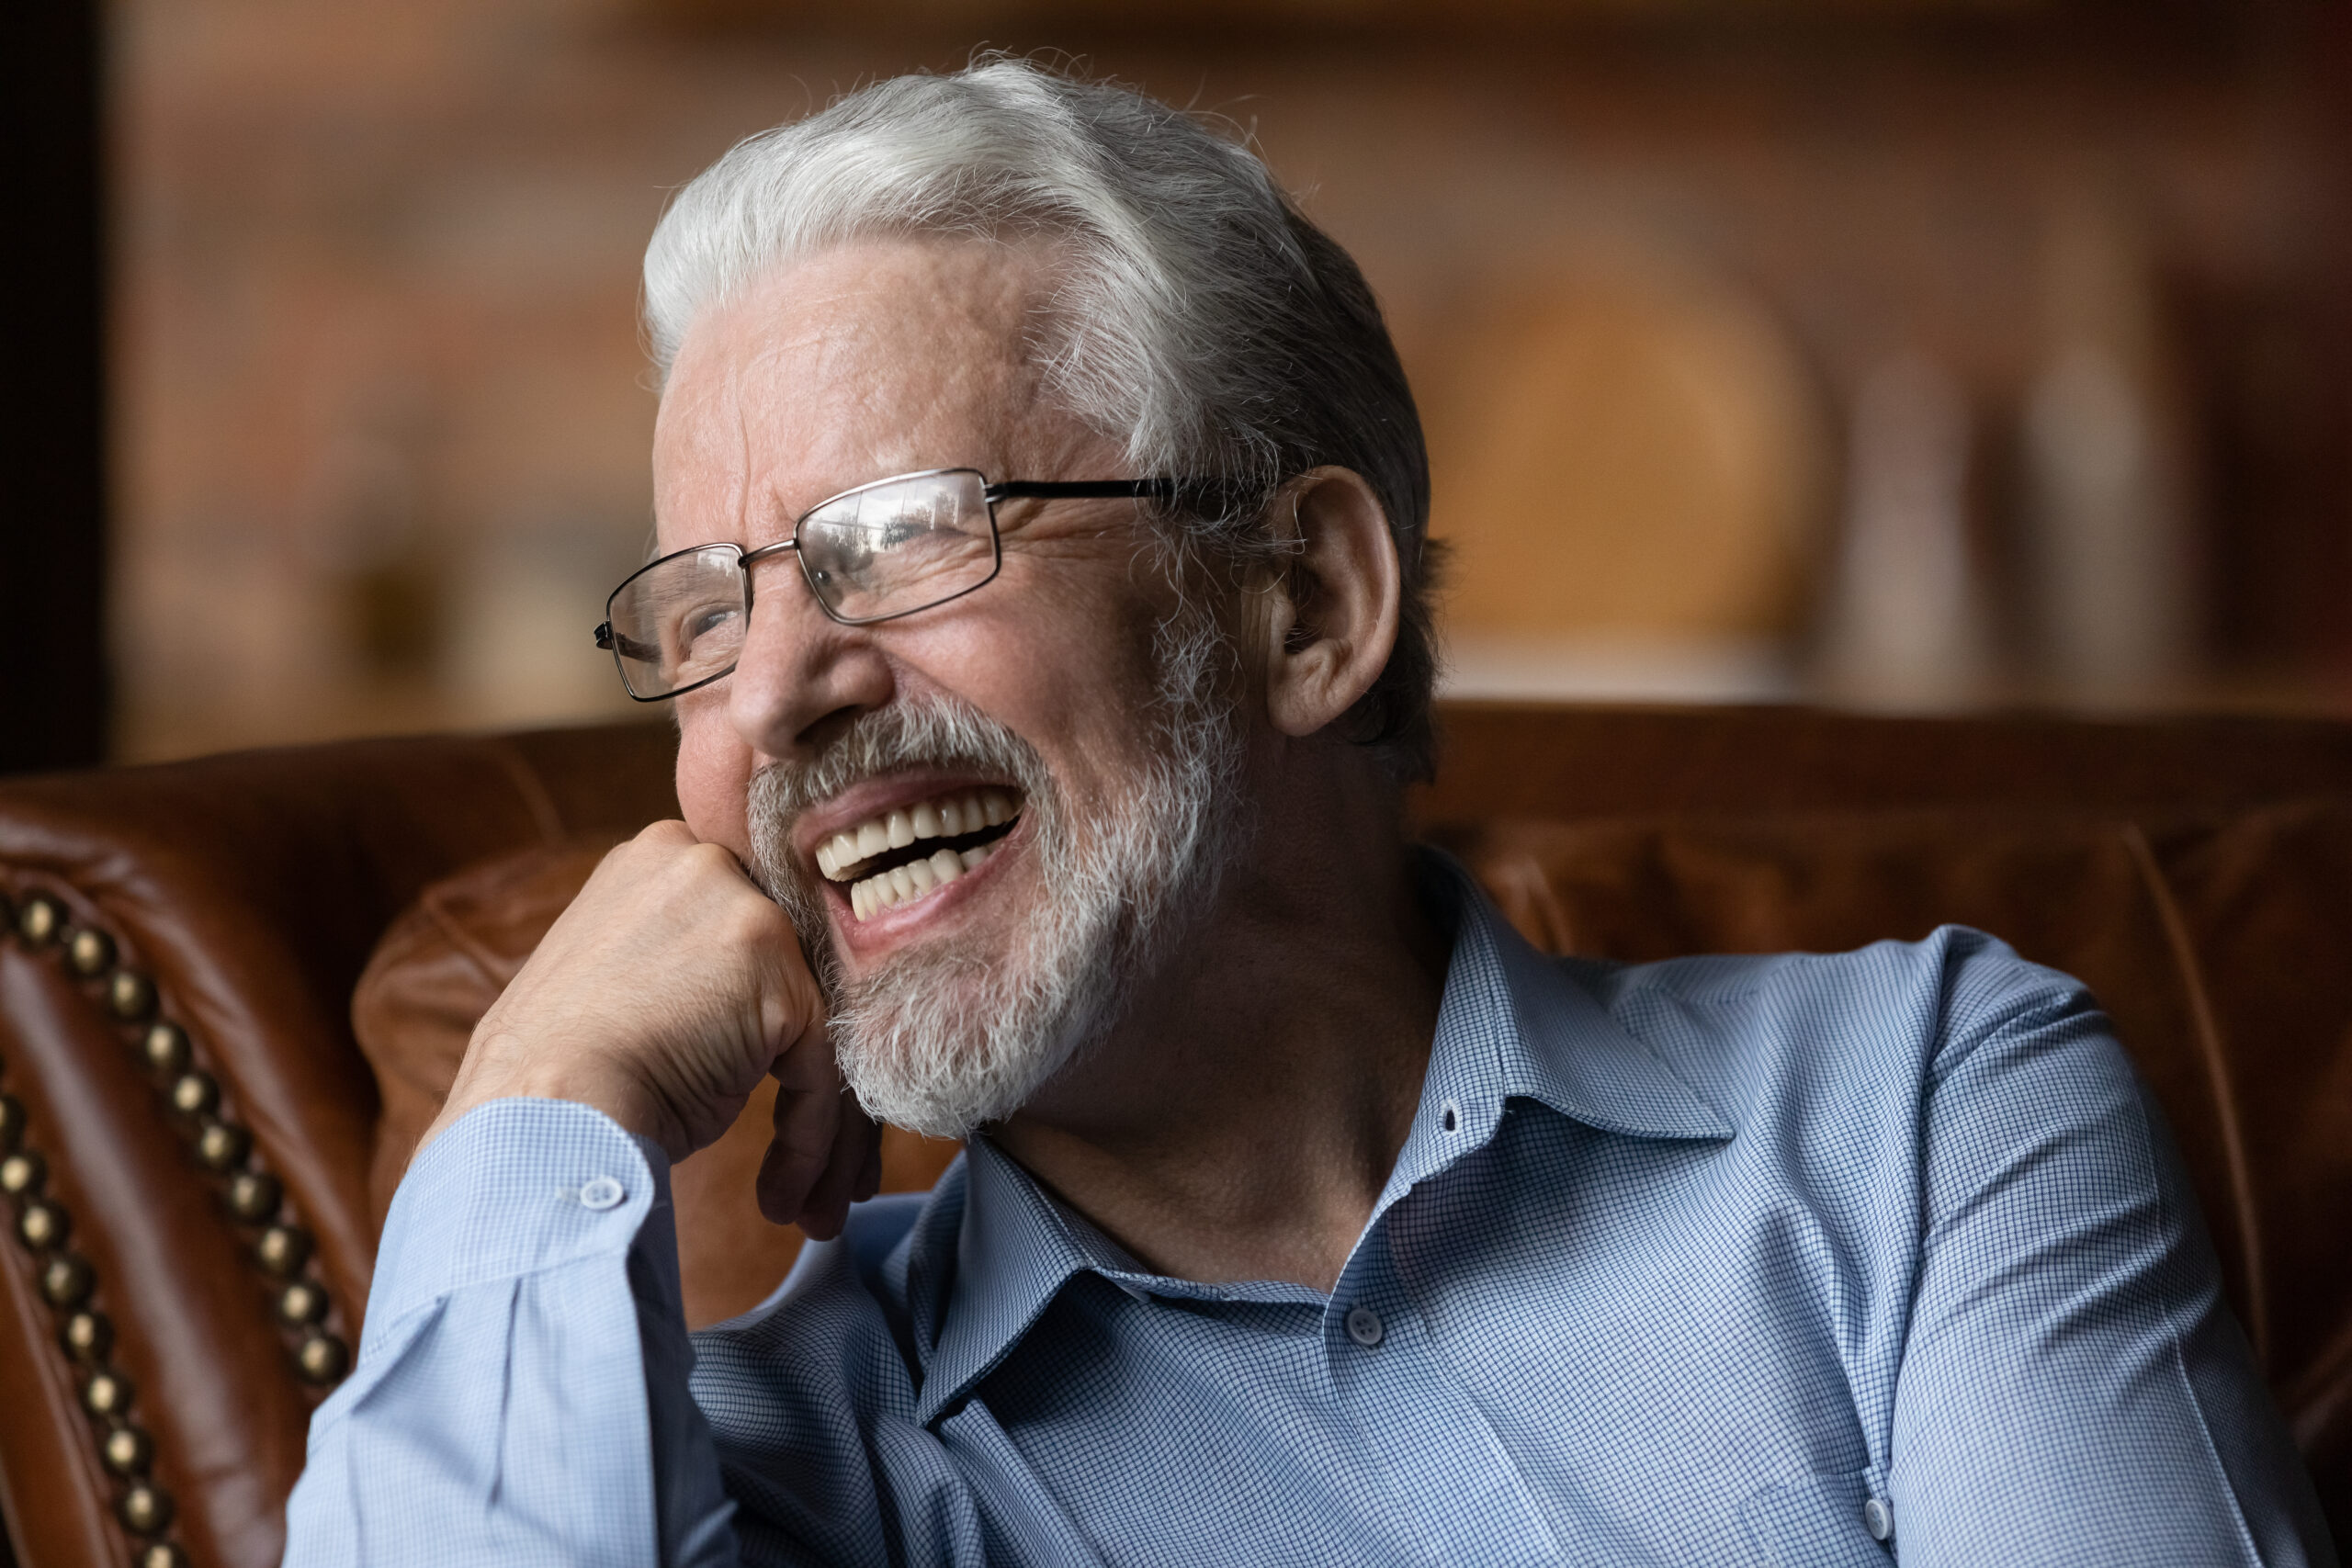 Older man with gray hair and glasses smiling and showing off dental implants